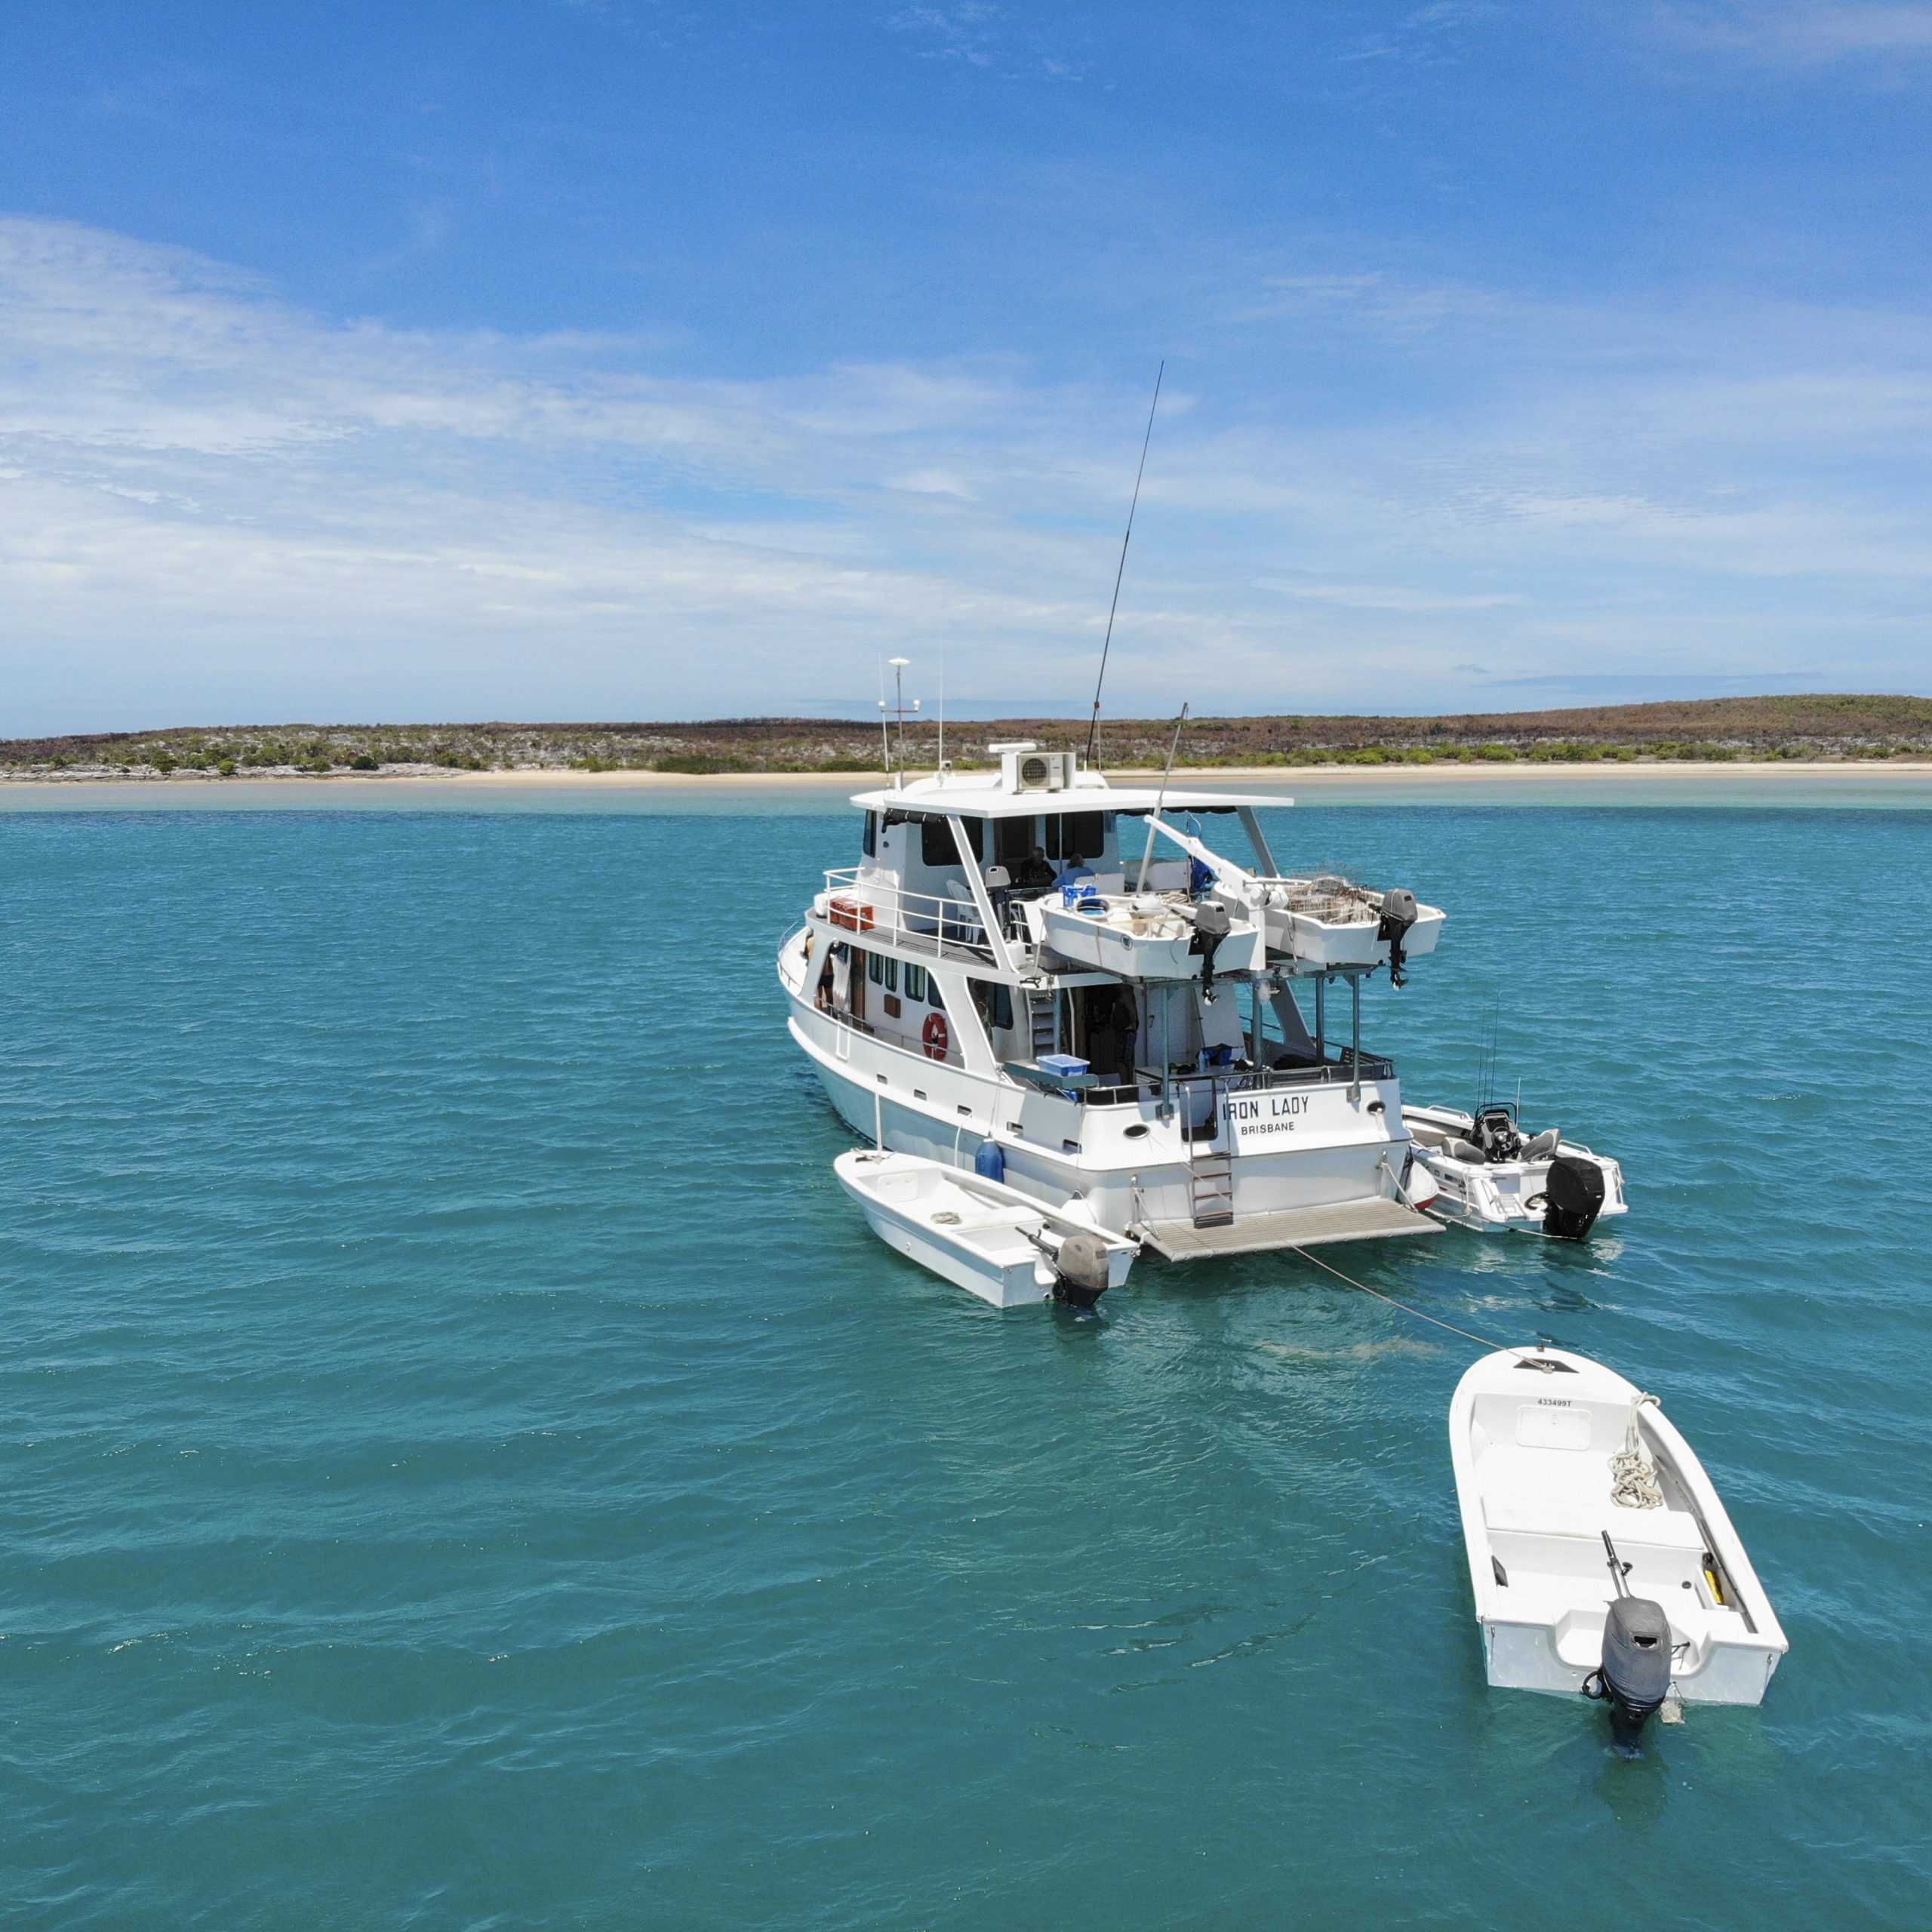 Iron Lady NT and Cairns Sport Fishing Charters